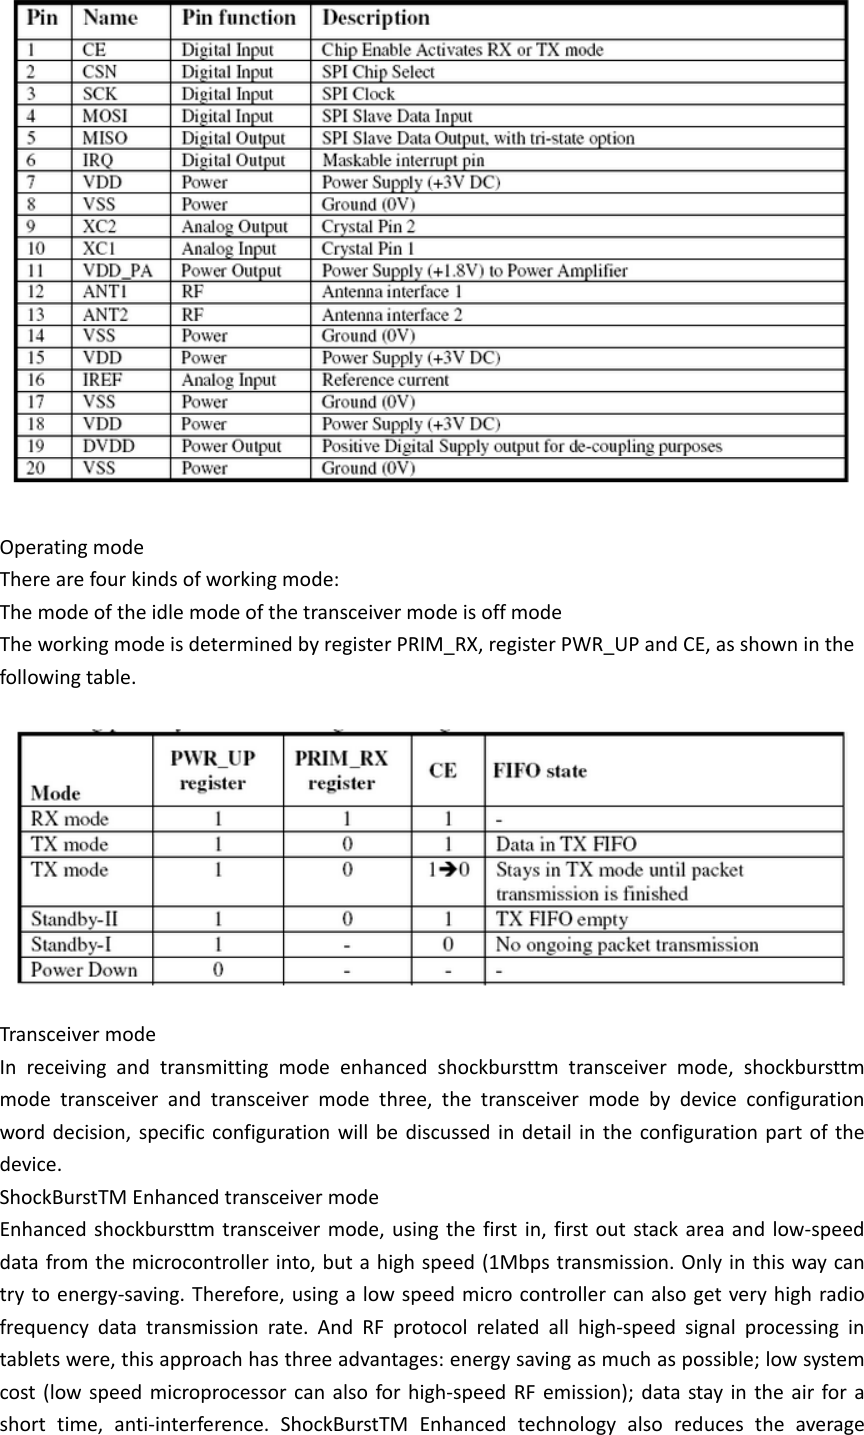   Operating mode  There are four kinds of working mode: The mode of the idle mode of the transceiver mode is off mode The working mode is determined by register PRIM_RX, register PWR_UP and CE, as shown in the following table. Transceiver mode In receiving and transmitting mode enhanced shockbursttm transceiver mode, shockbursttm mode transceiver and transceiver mode three, the transceiver mode by device configuration word decision, specific configuration will be discussed in detail in the configuration part of the device. ShockBurstTM Enhanced transceiver mode Enhanced shockbursttm transceiver mode, using the first in, first out stack area and low-speed data from the microcontroller into, but a high speed (1Mbps transmission. Only in this way can try to energy-saving. Therefore, using a low speed micro controller can also get very high radio frequency data transmission rate. And RF protocol related all high-speed signal processing in tablets were, this approach has three advantages: energy saving as much as possible; low system cost (low speed microprocessor can also for high-speed RF emission); data stay in the air for a short time, anti-interference. ShockBurstTM Enhanced technology also reduces the average 